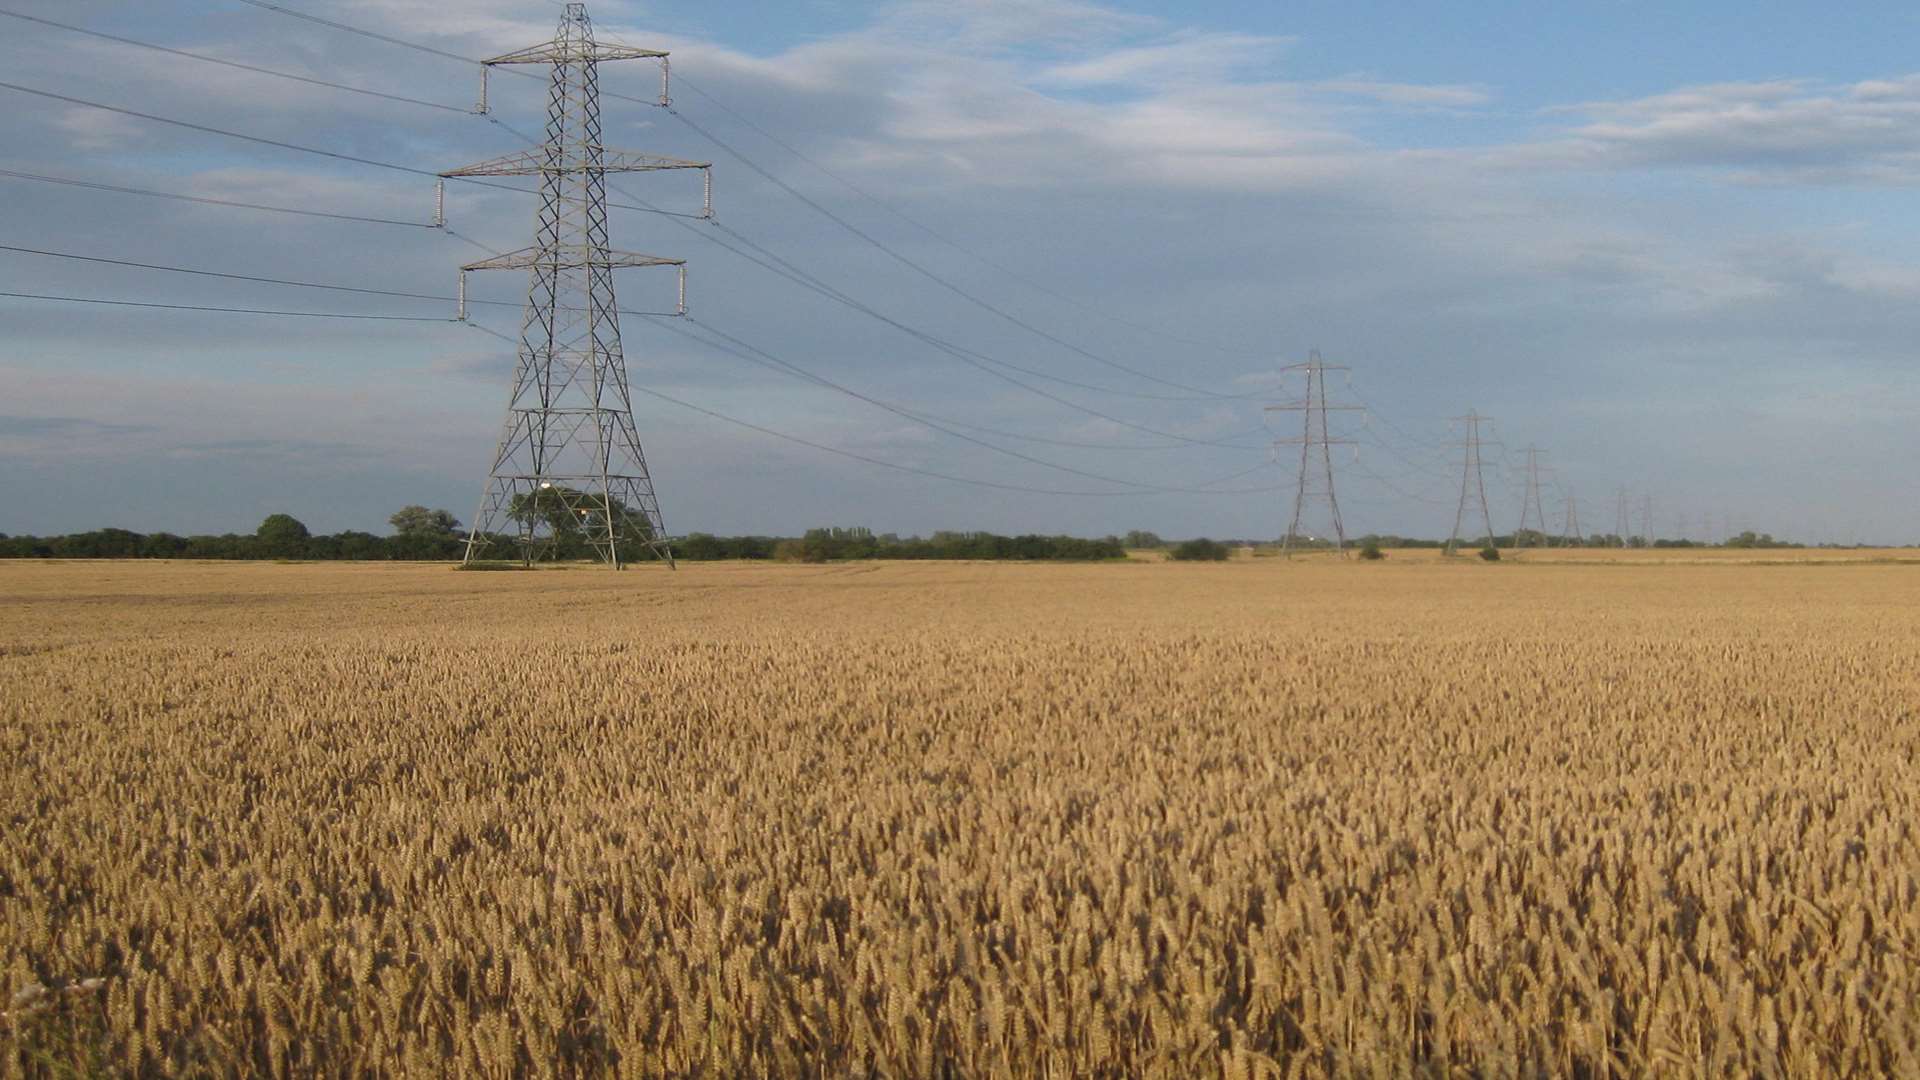 The final pylon plans have been revealed